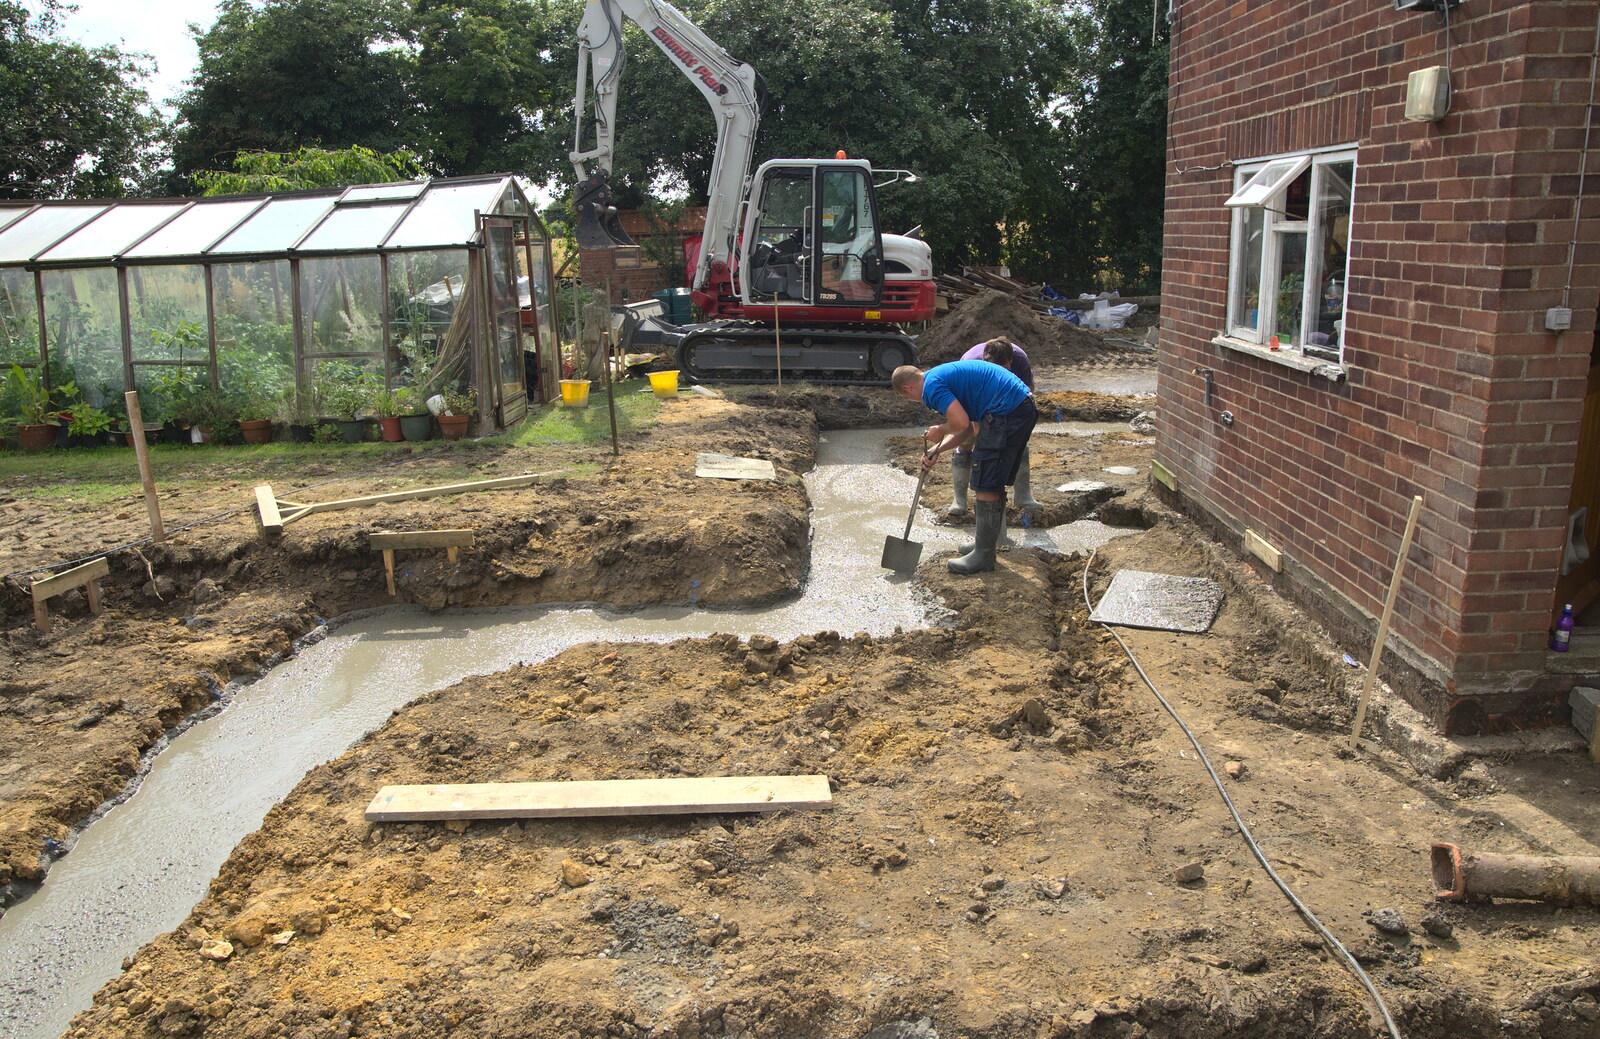 A river of concrete around the house from Grand Designs: Building Commences, Brome, Suffolk - 8th August 2013